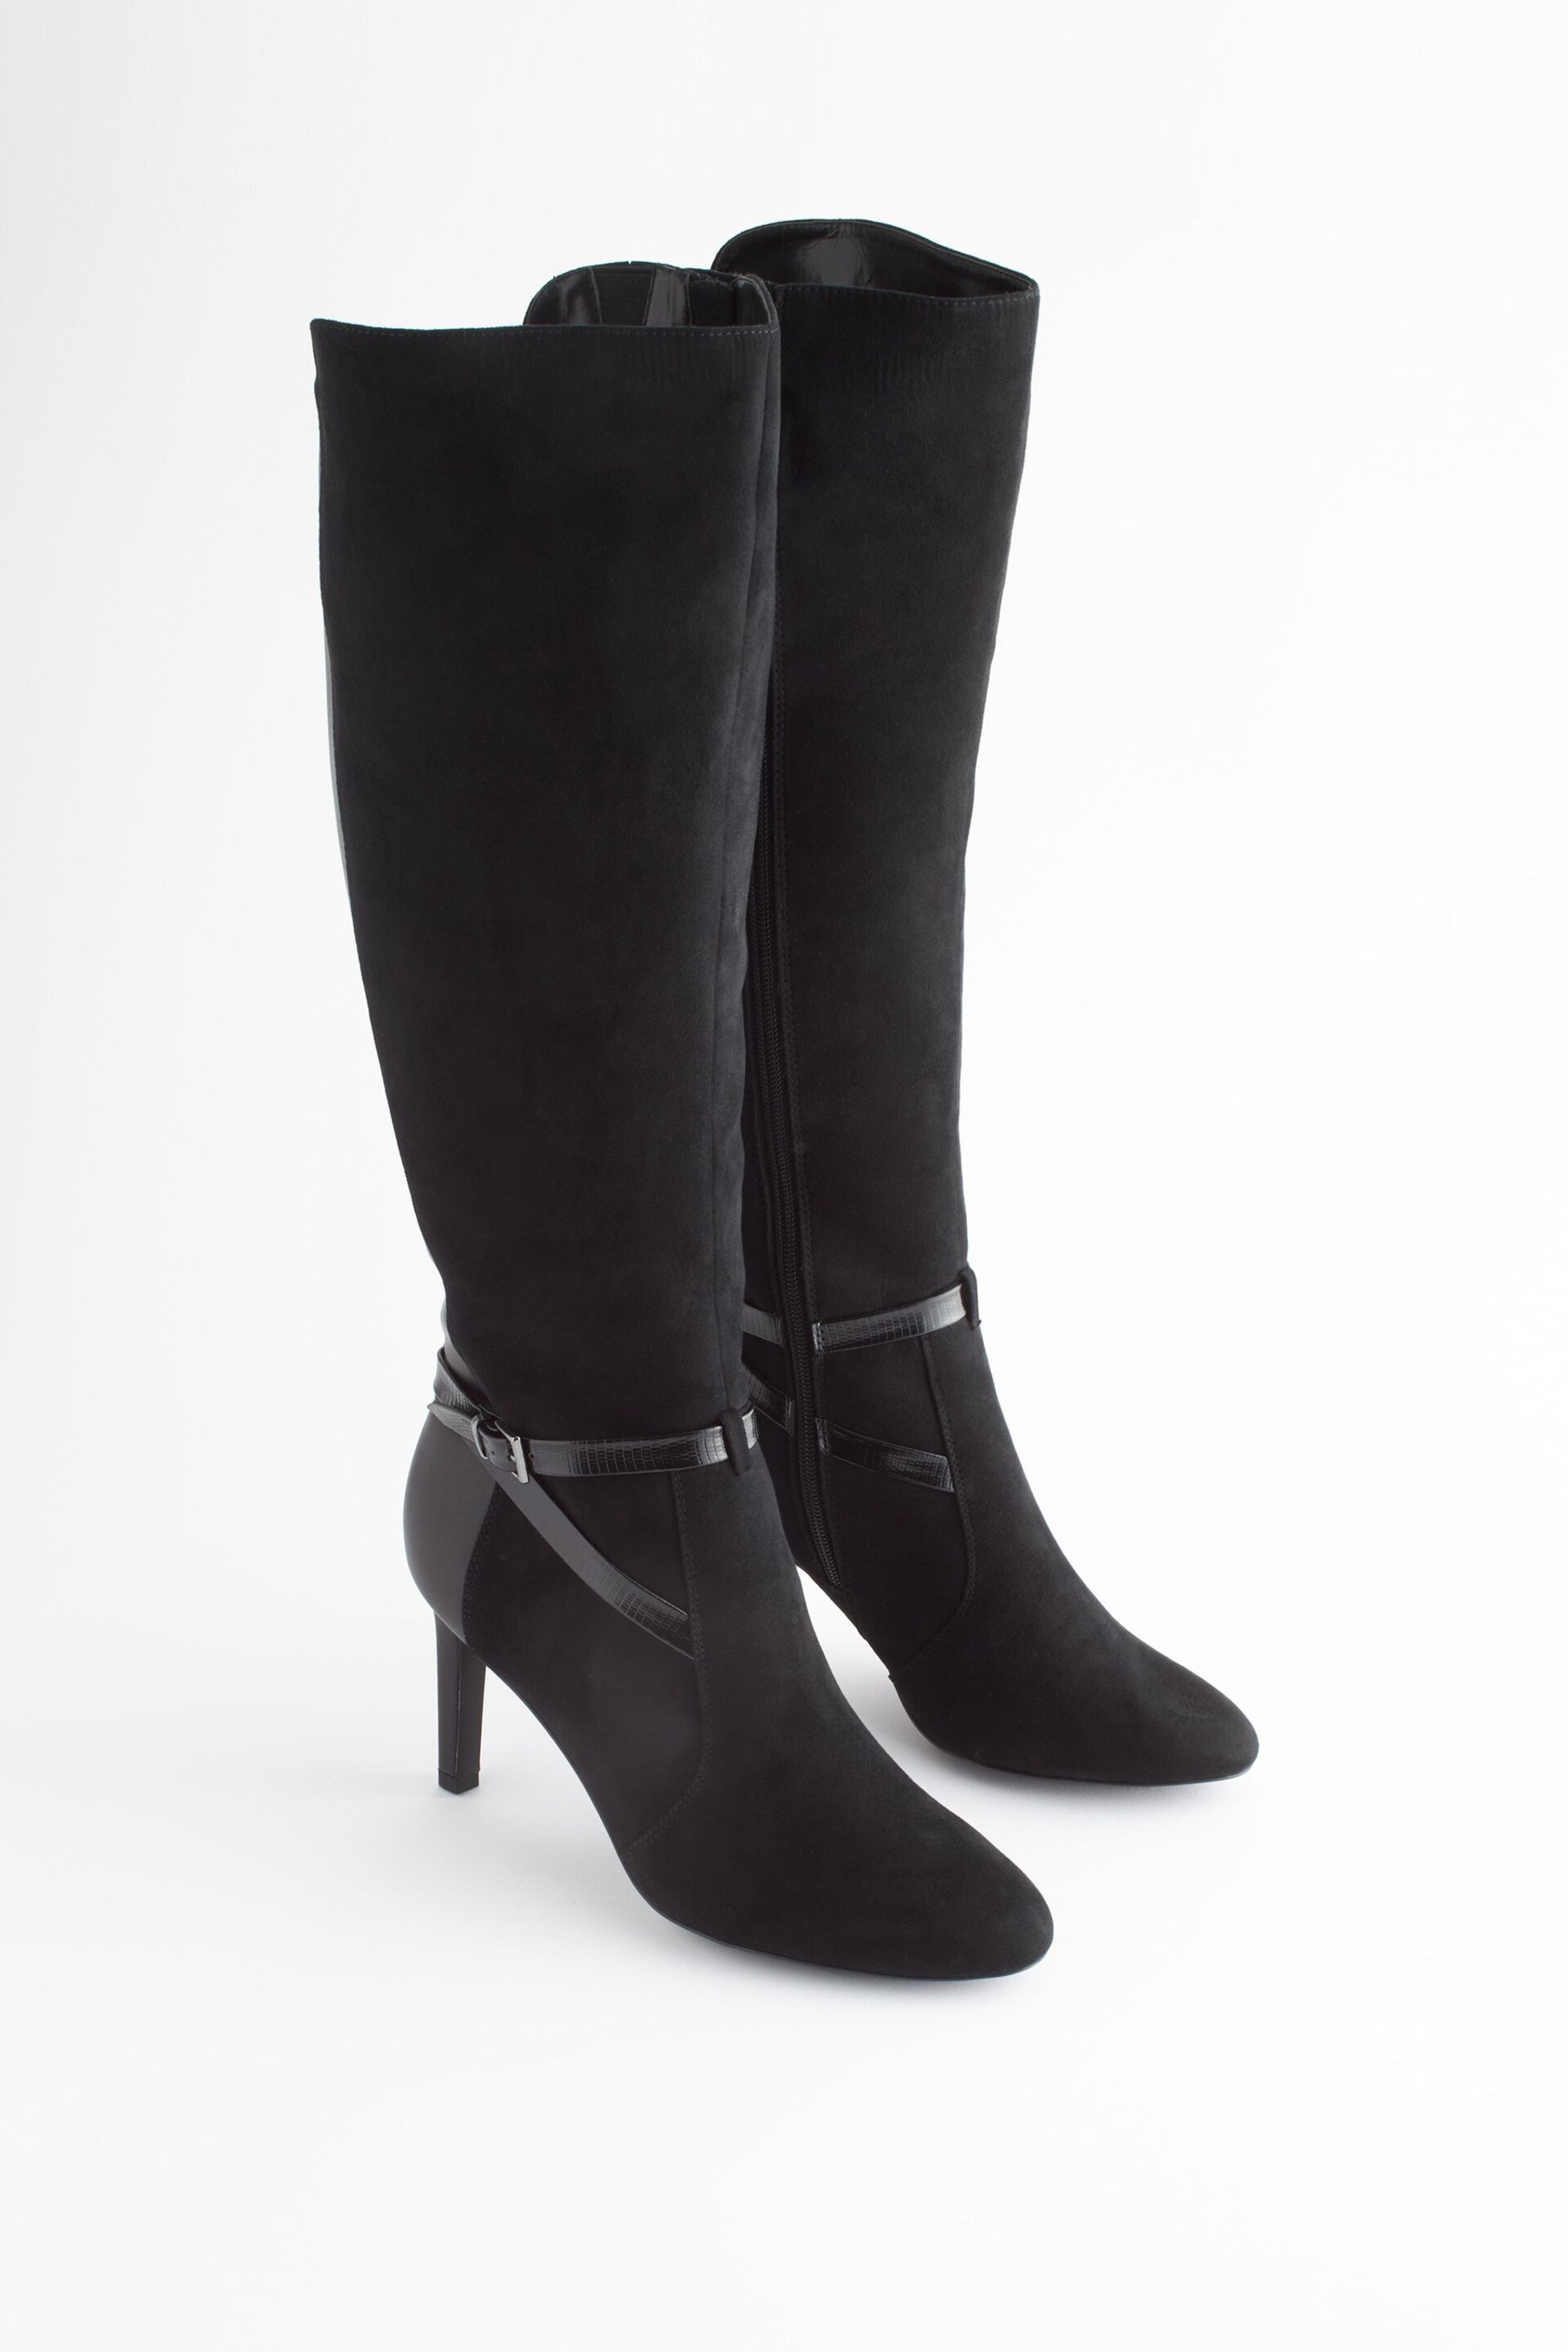 Black Extra Wide Fit Forever Comfort® Buckle Detail Heeled Knee High Boots - Image 1 of 6